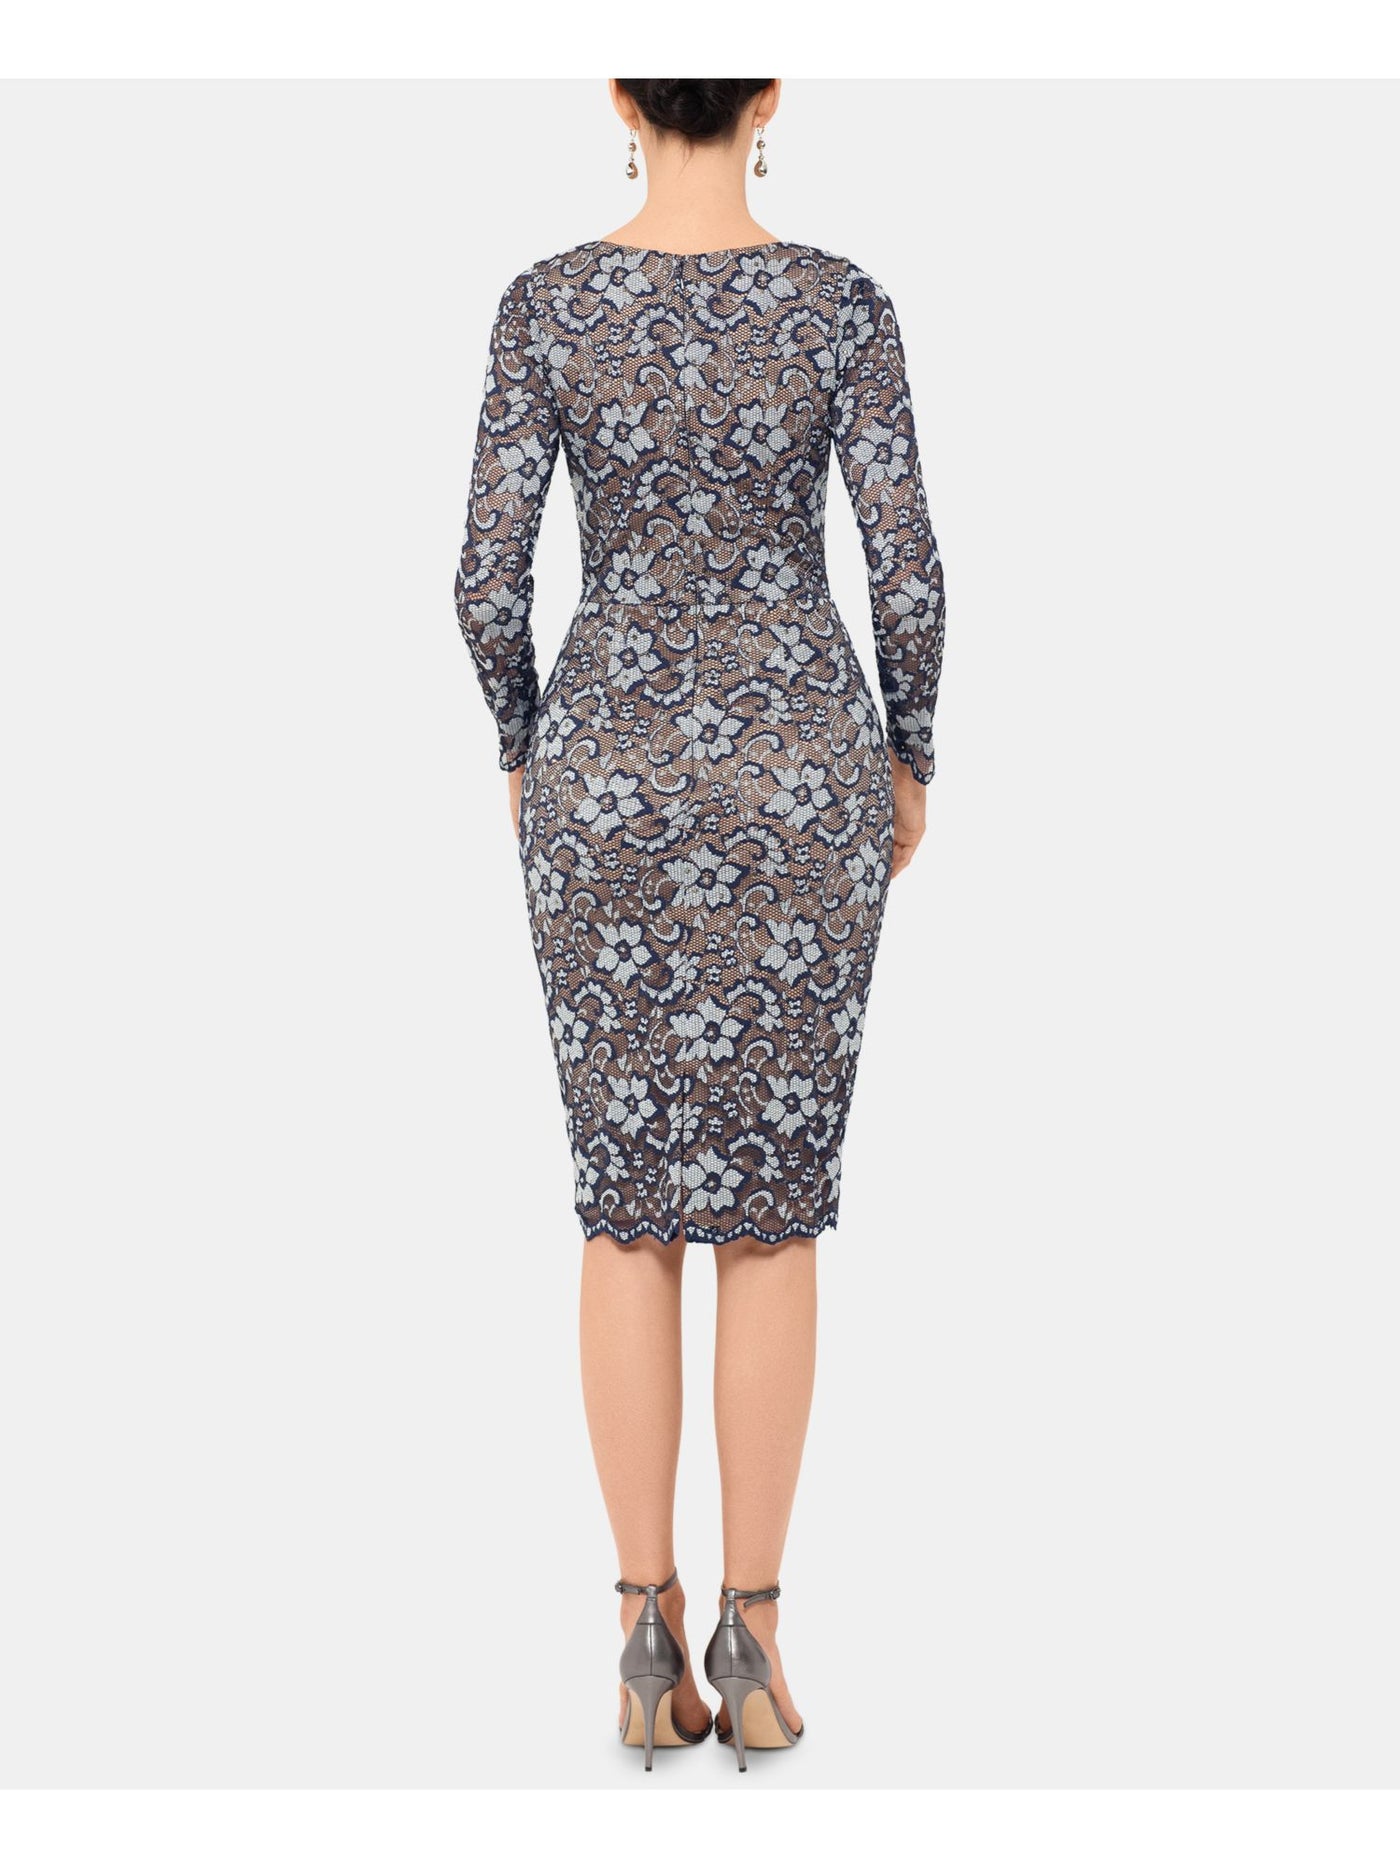 XSCAPE Womens Lace Speckled Long Sleeve Jewel Neck Below The Knee Cocktail Sheath Dress